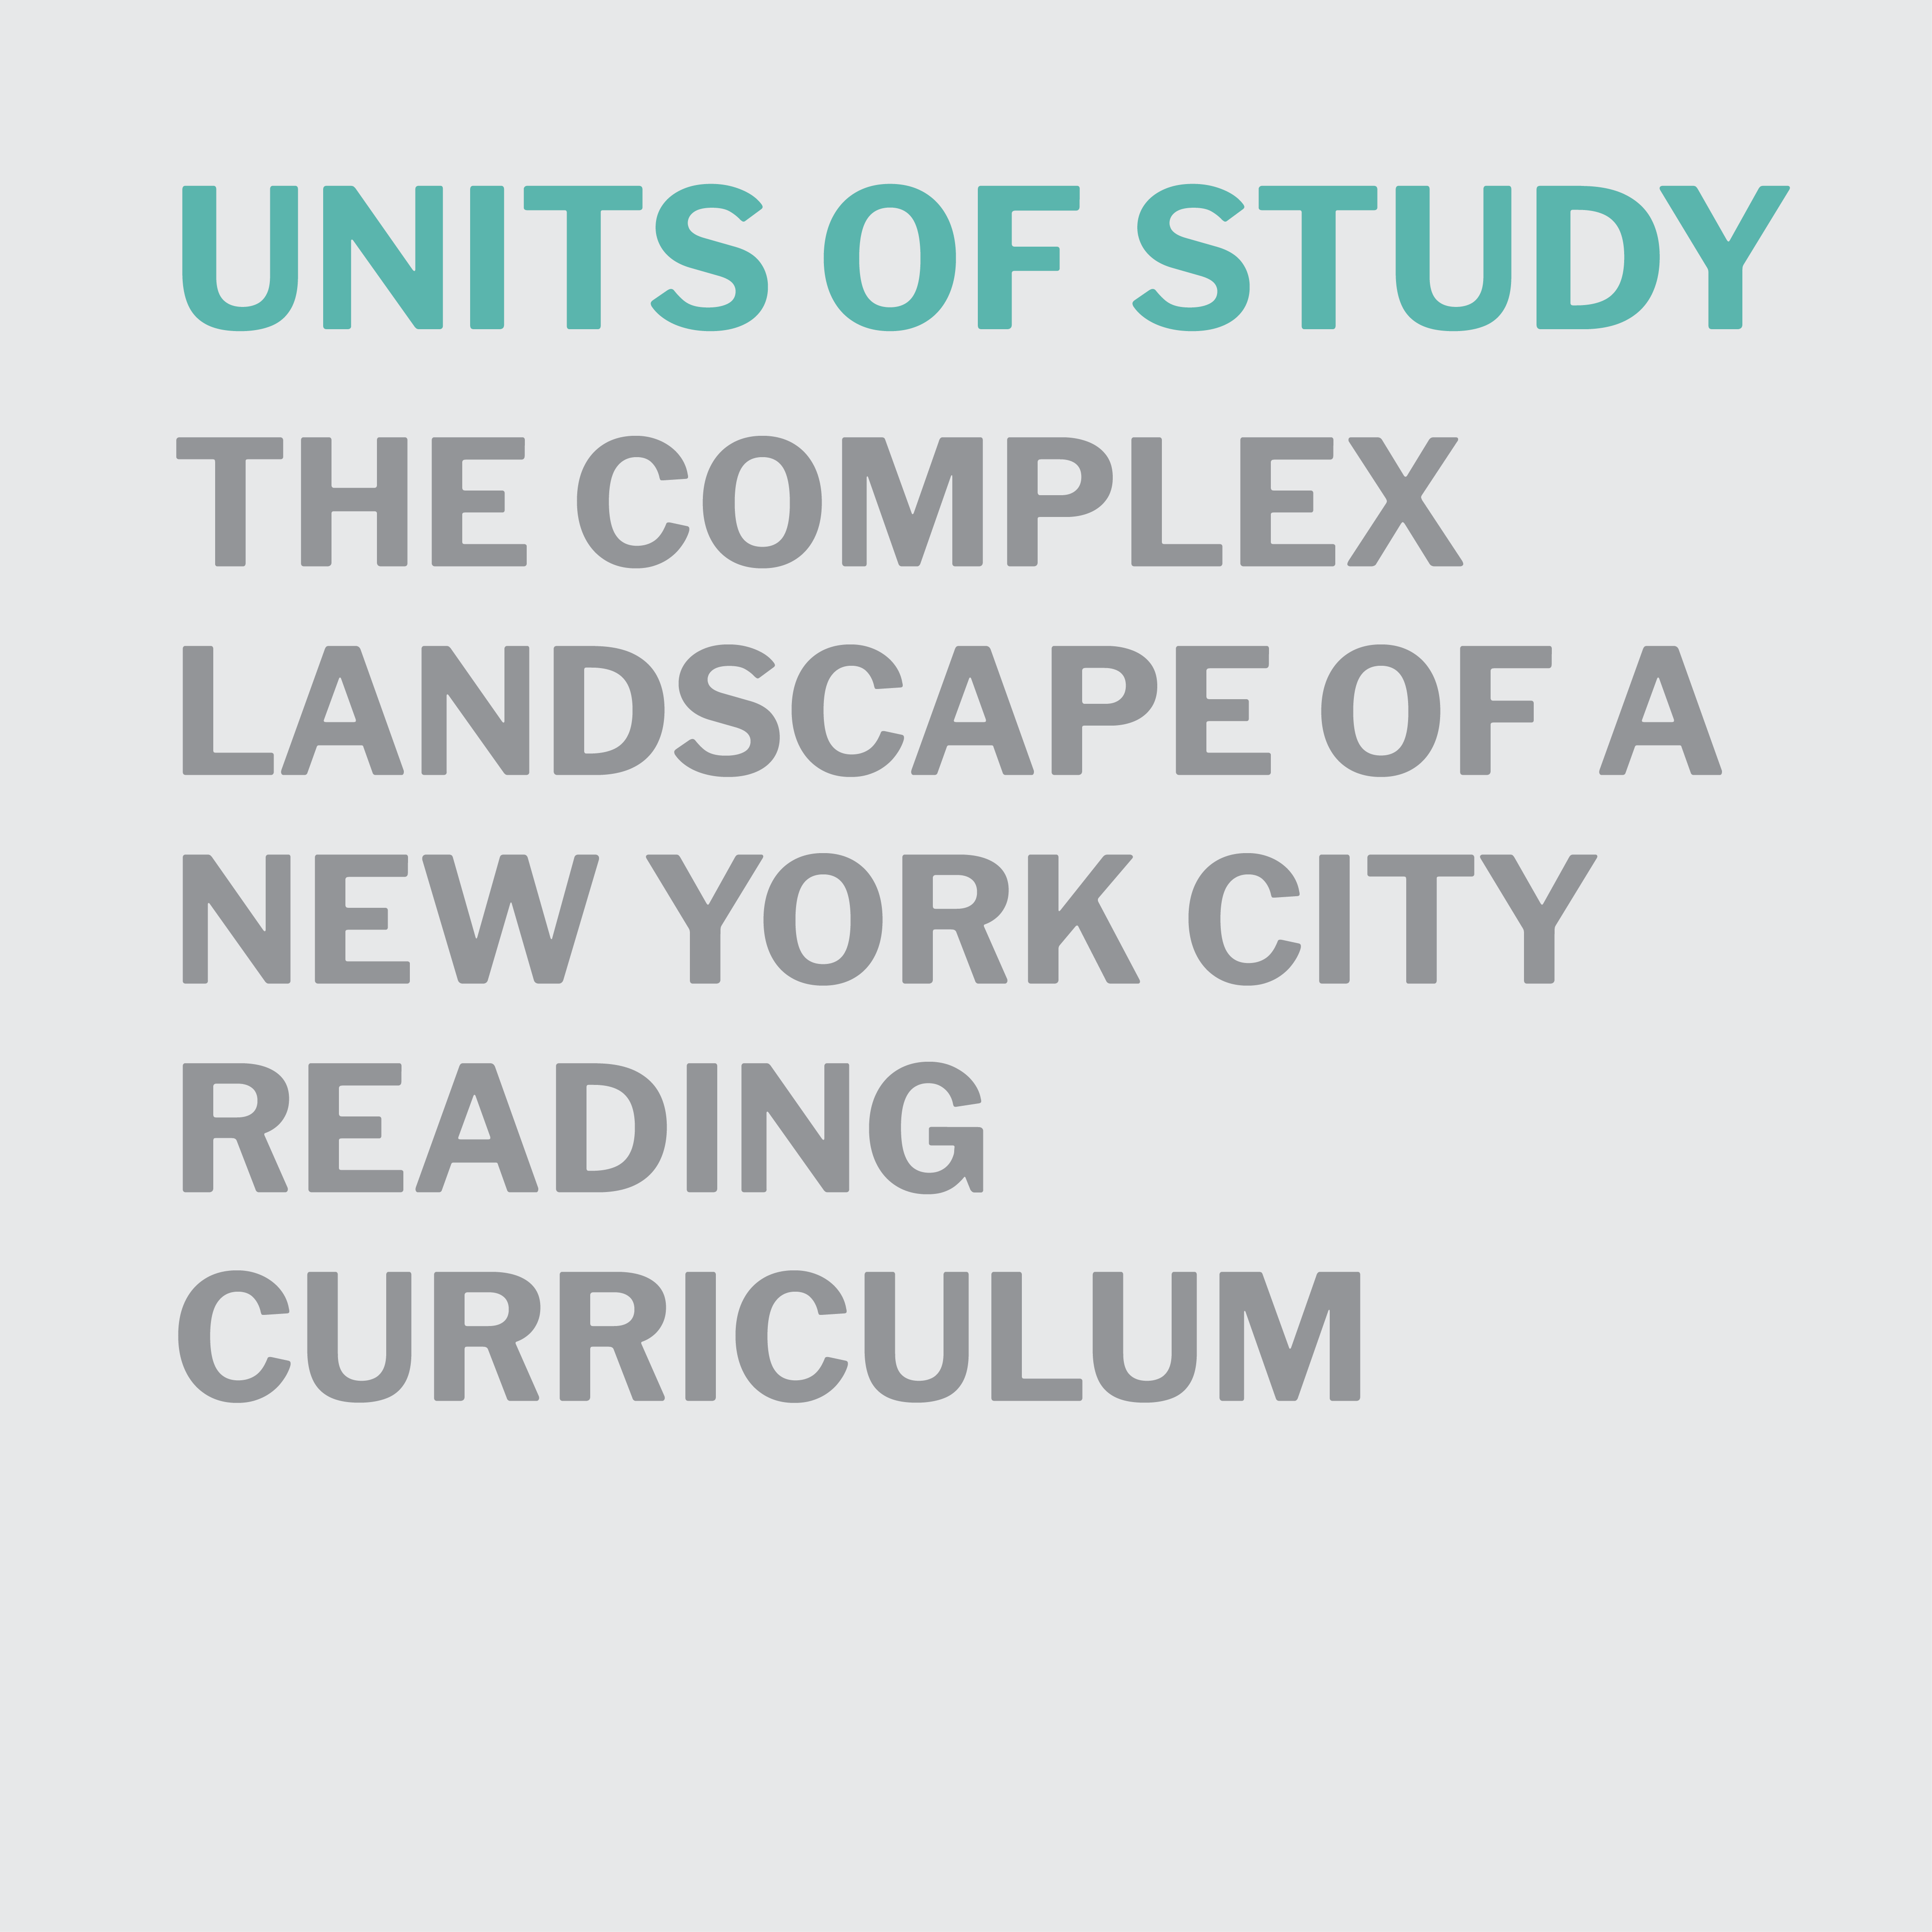 Units of Study: The Complex Landscape of a New York City Reading Curriculum